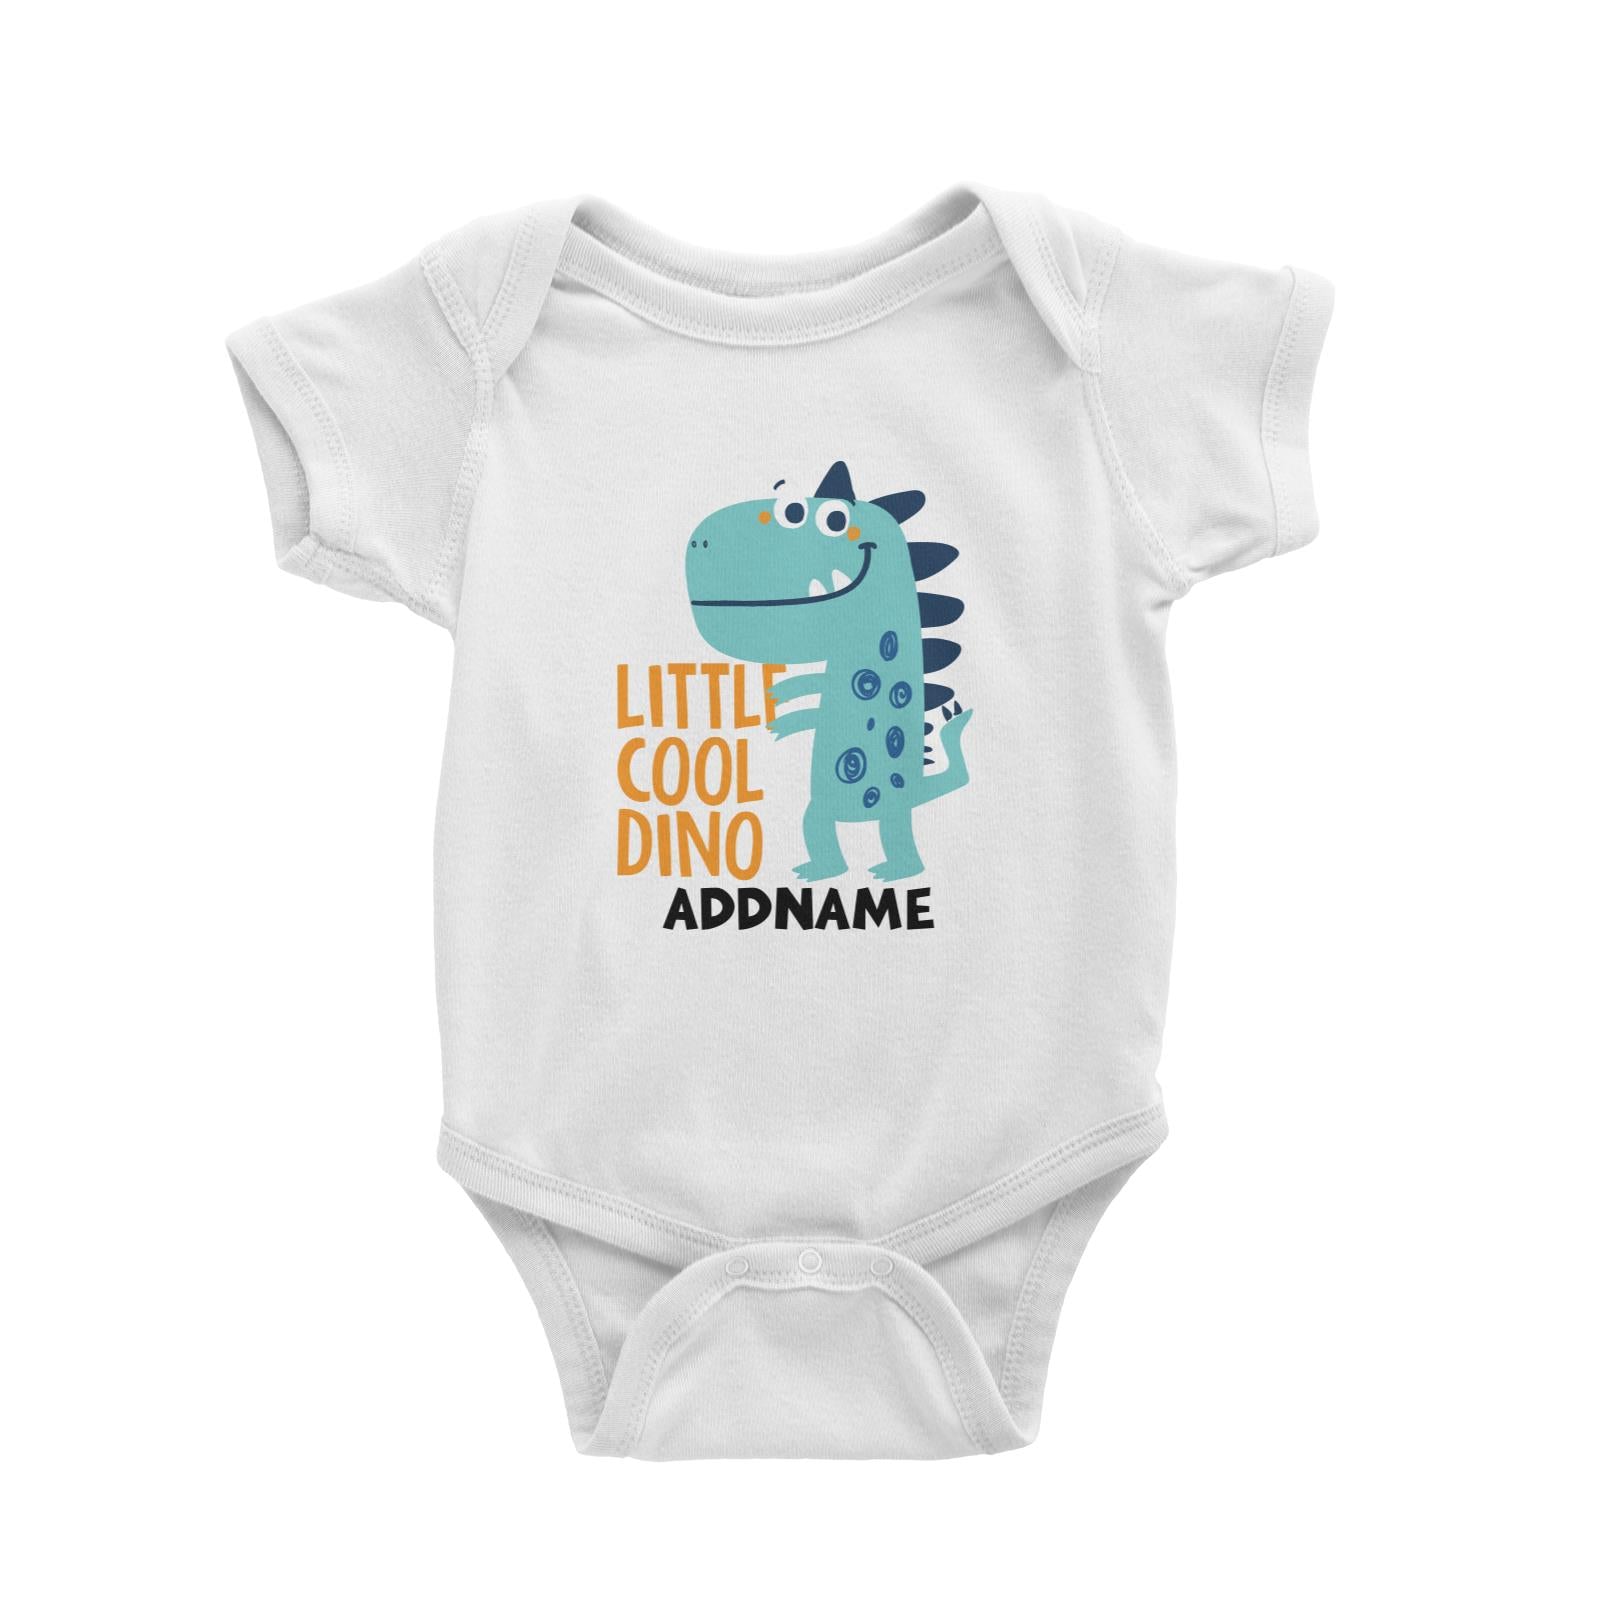 Little Cool Dino Addname White Baby Romper